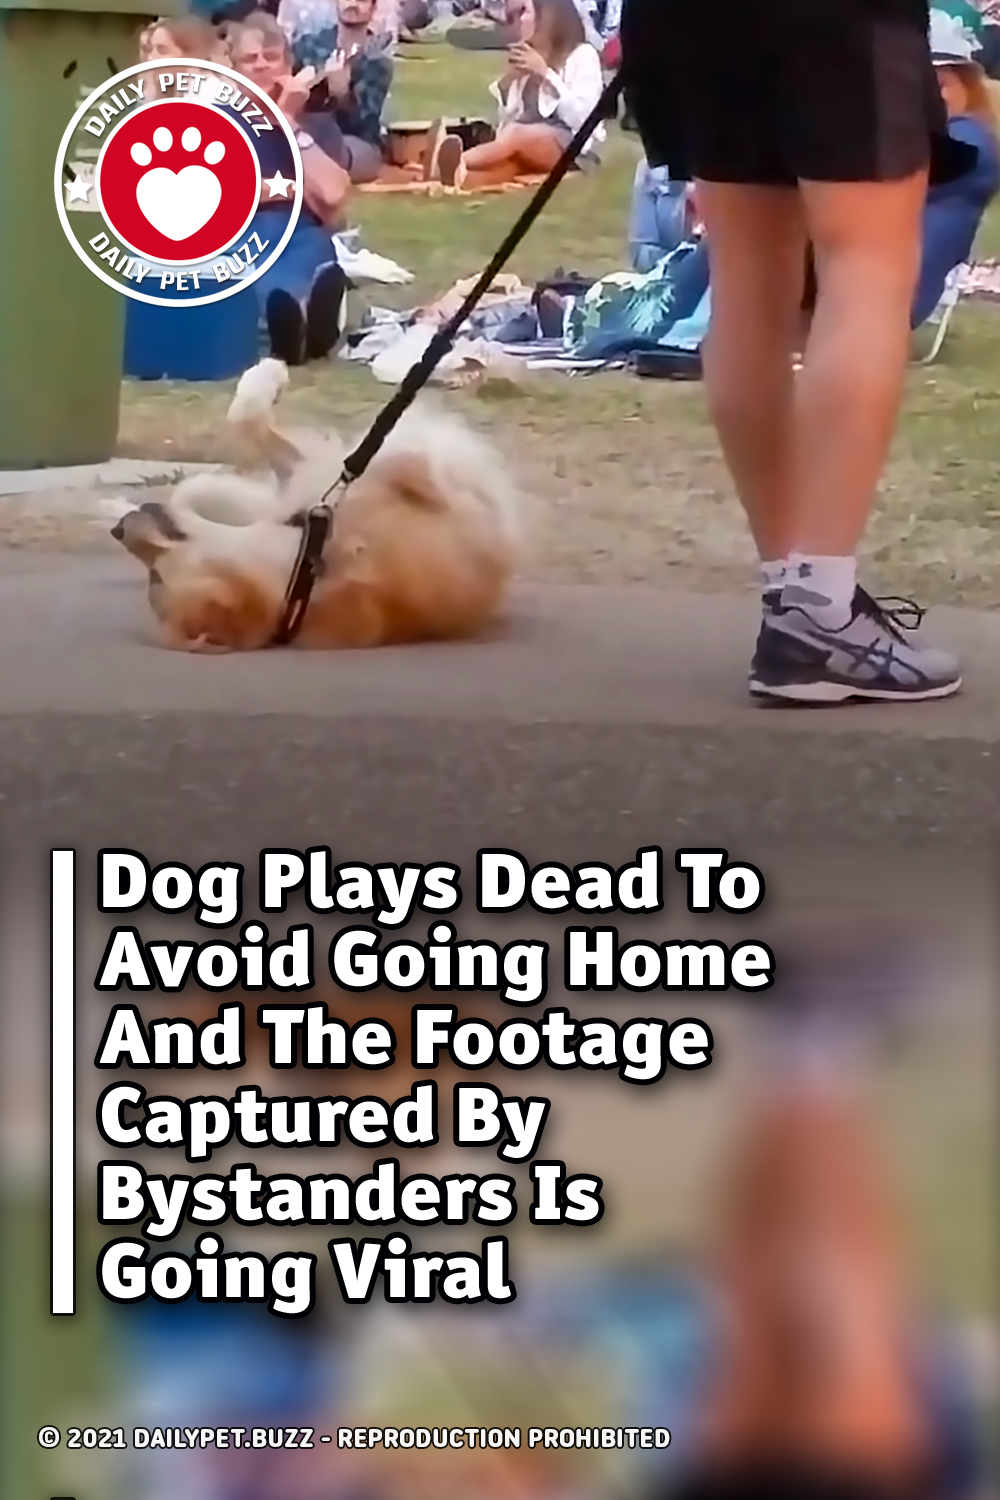 Dog Plays Dead To Avoid Going Home And The Footage Captured By Bystanders Is Going Viral